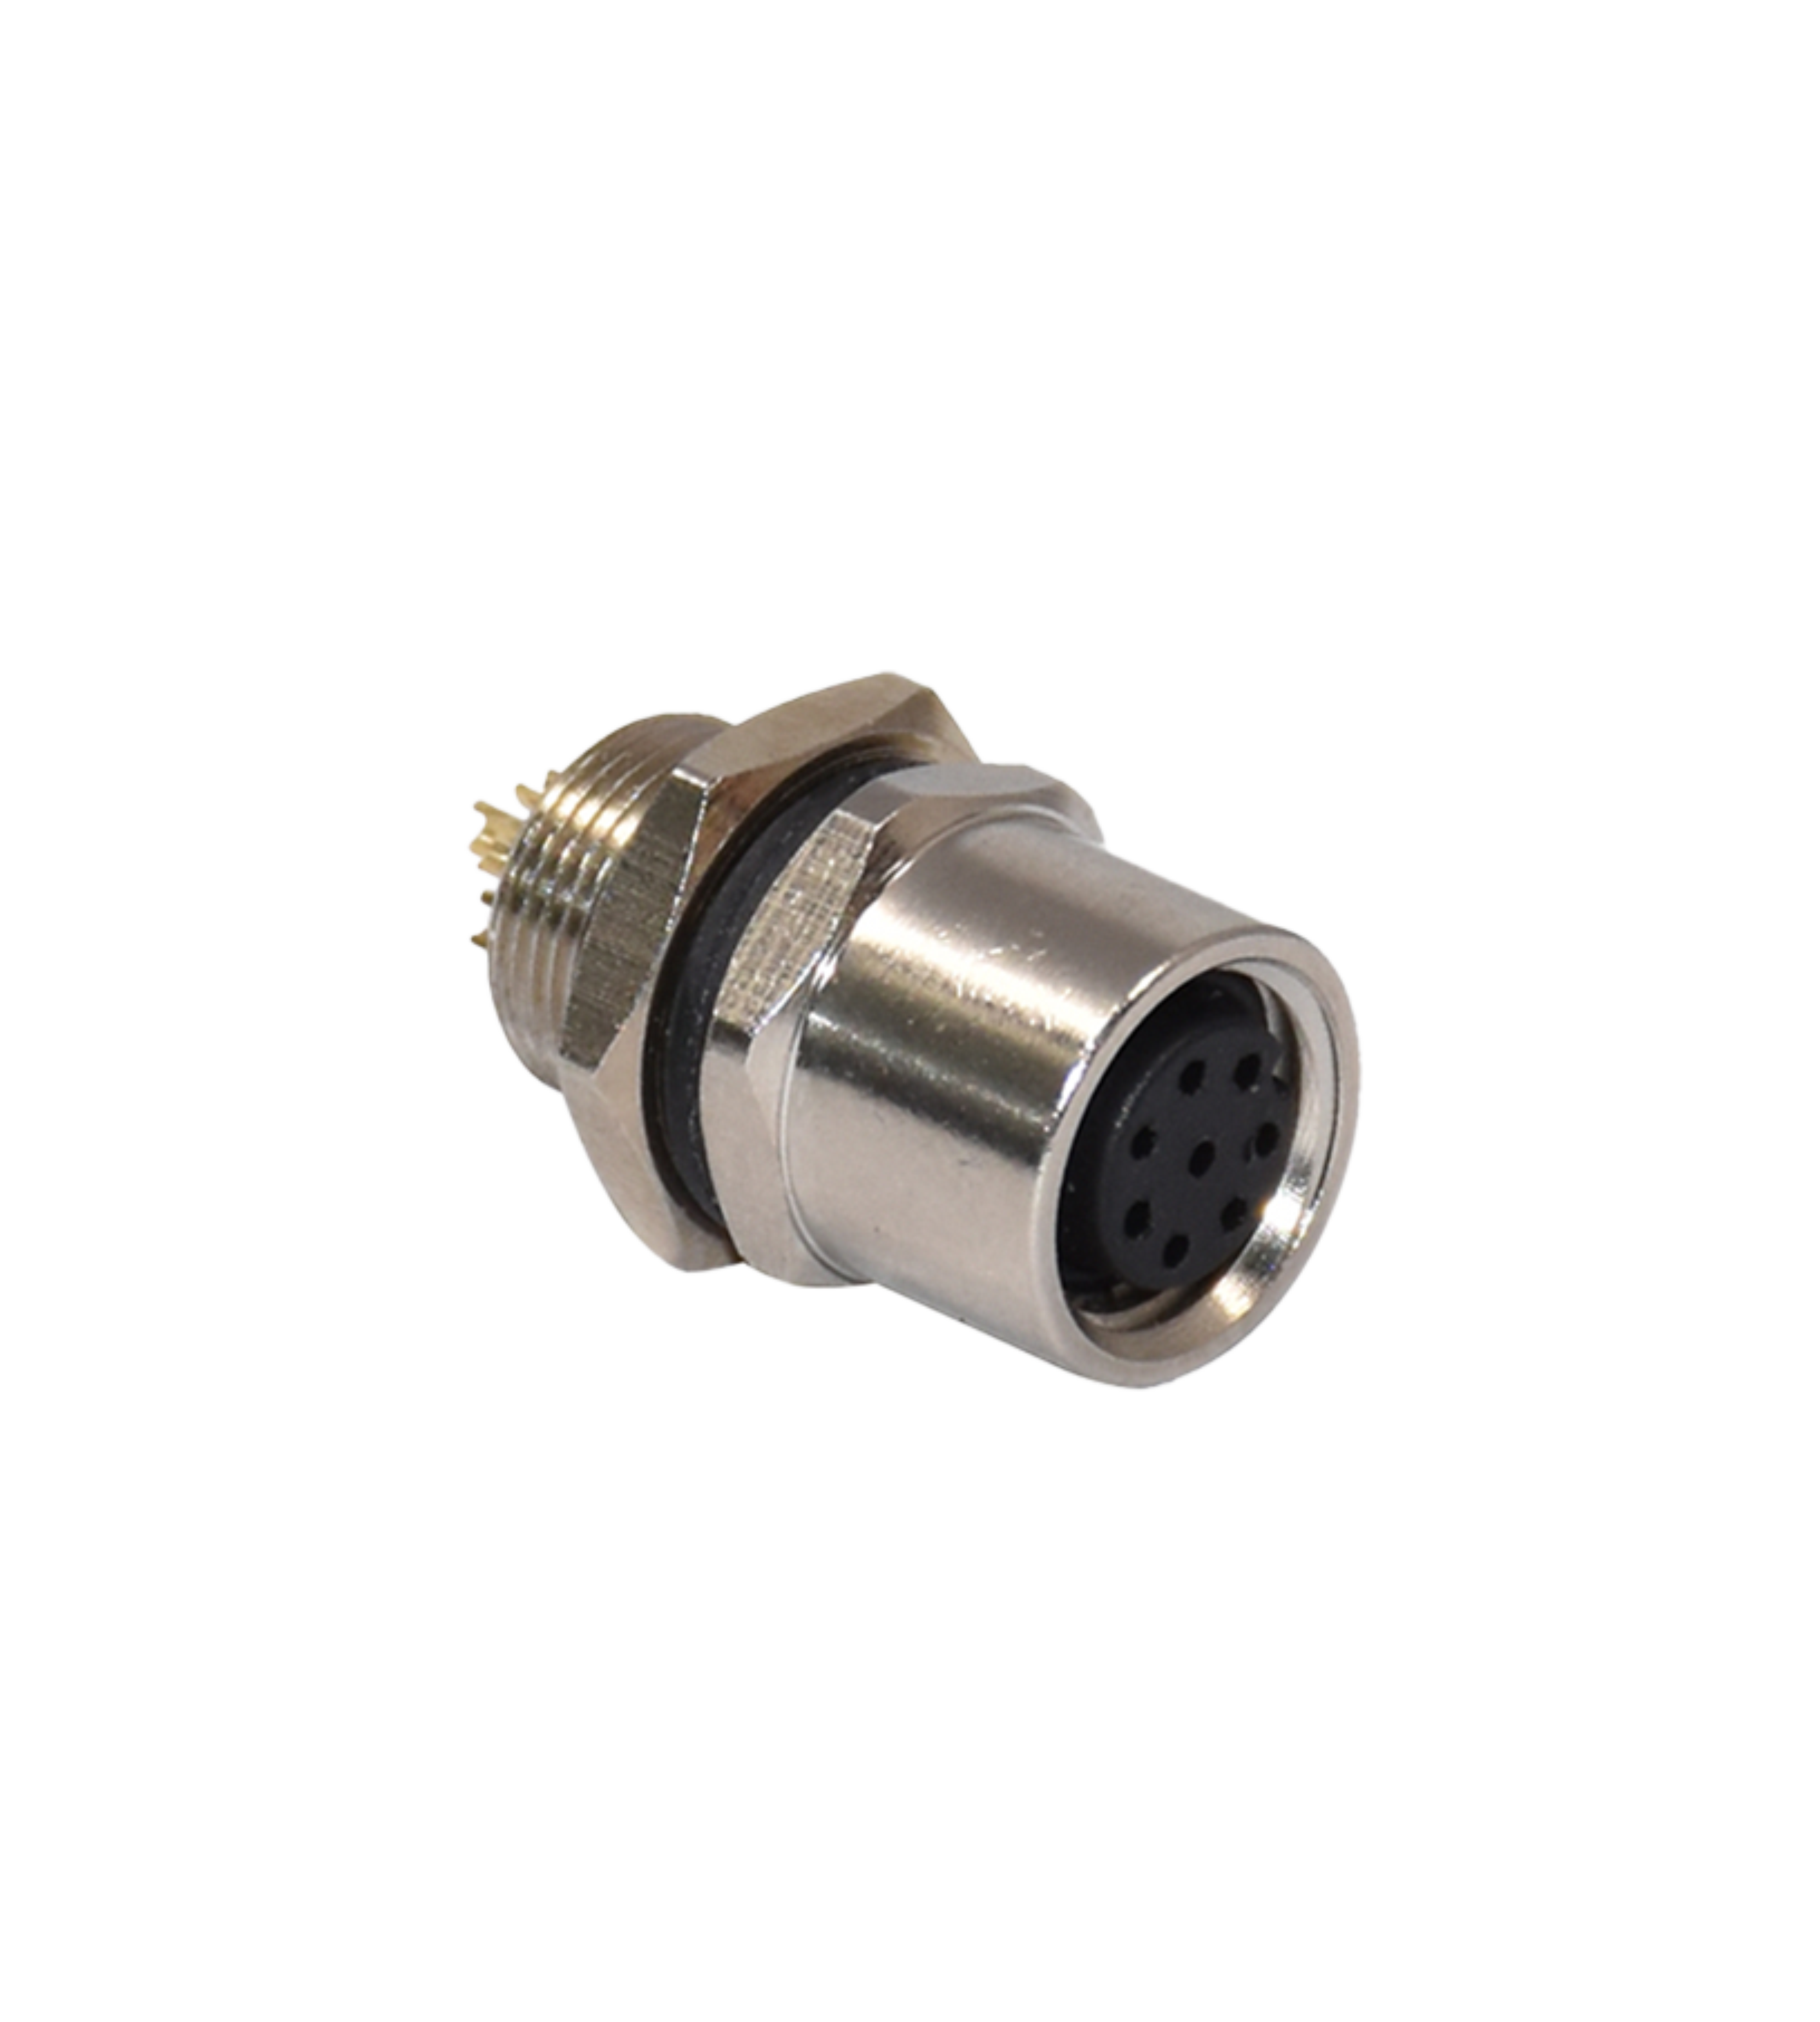 Rigoal's Premier M8 Connectors: Industrial-Grade Solutions for Secure and Efficient Connectivity